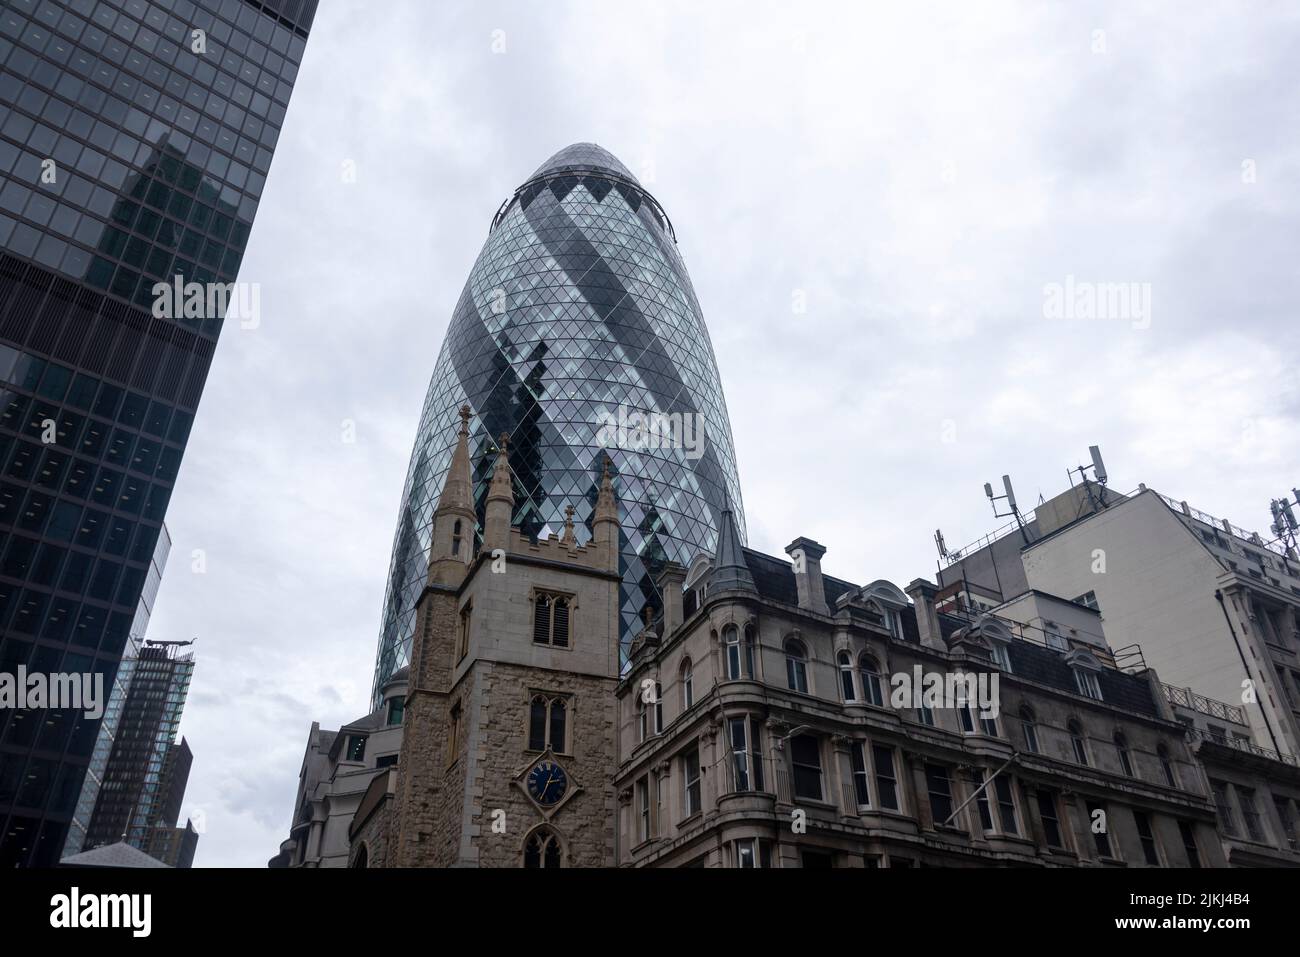 Church St Andrew Undershaft, behind Swiss Re Tower, 30 St Mary Axe, also called The Gherkin, financial district City of London, London, United Kingdom Stock Photo